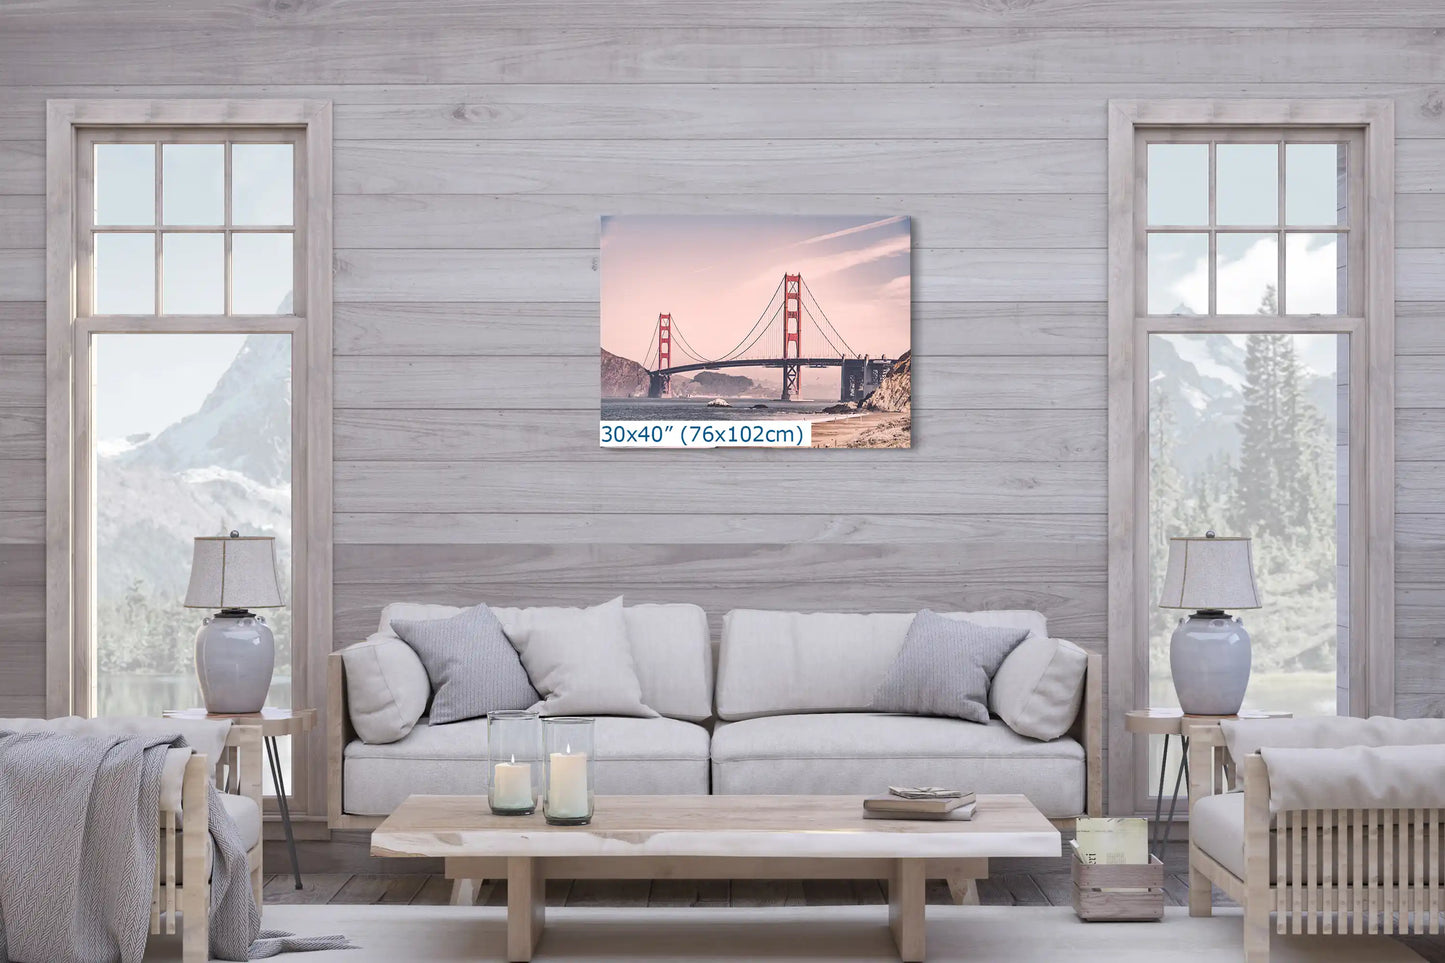 A 30x40 canvas print showcasing the Golden Gate Bridge in a vintage look, adding a classic touch to a modern living room setting.